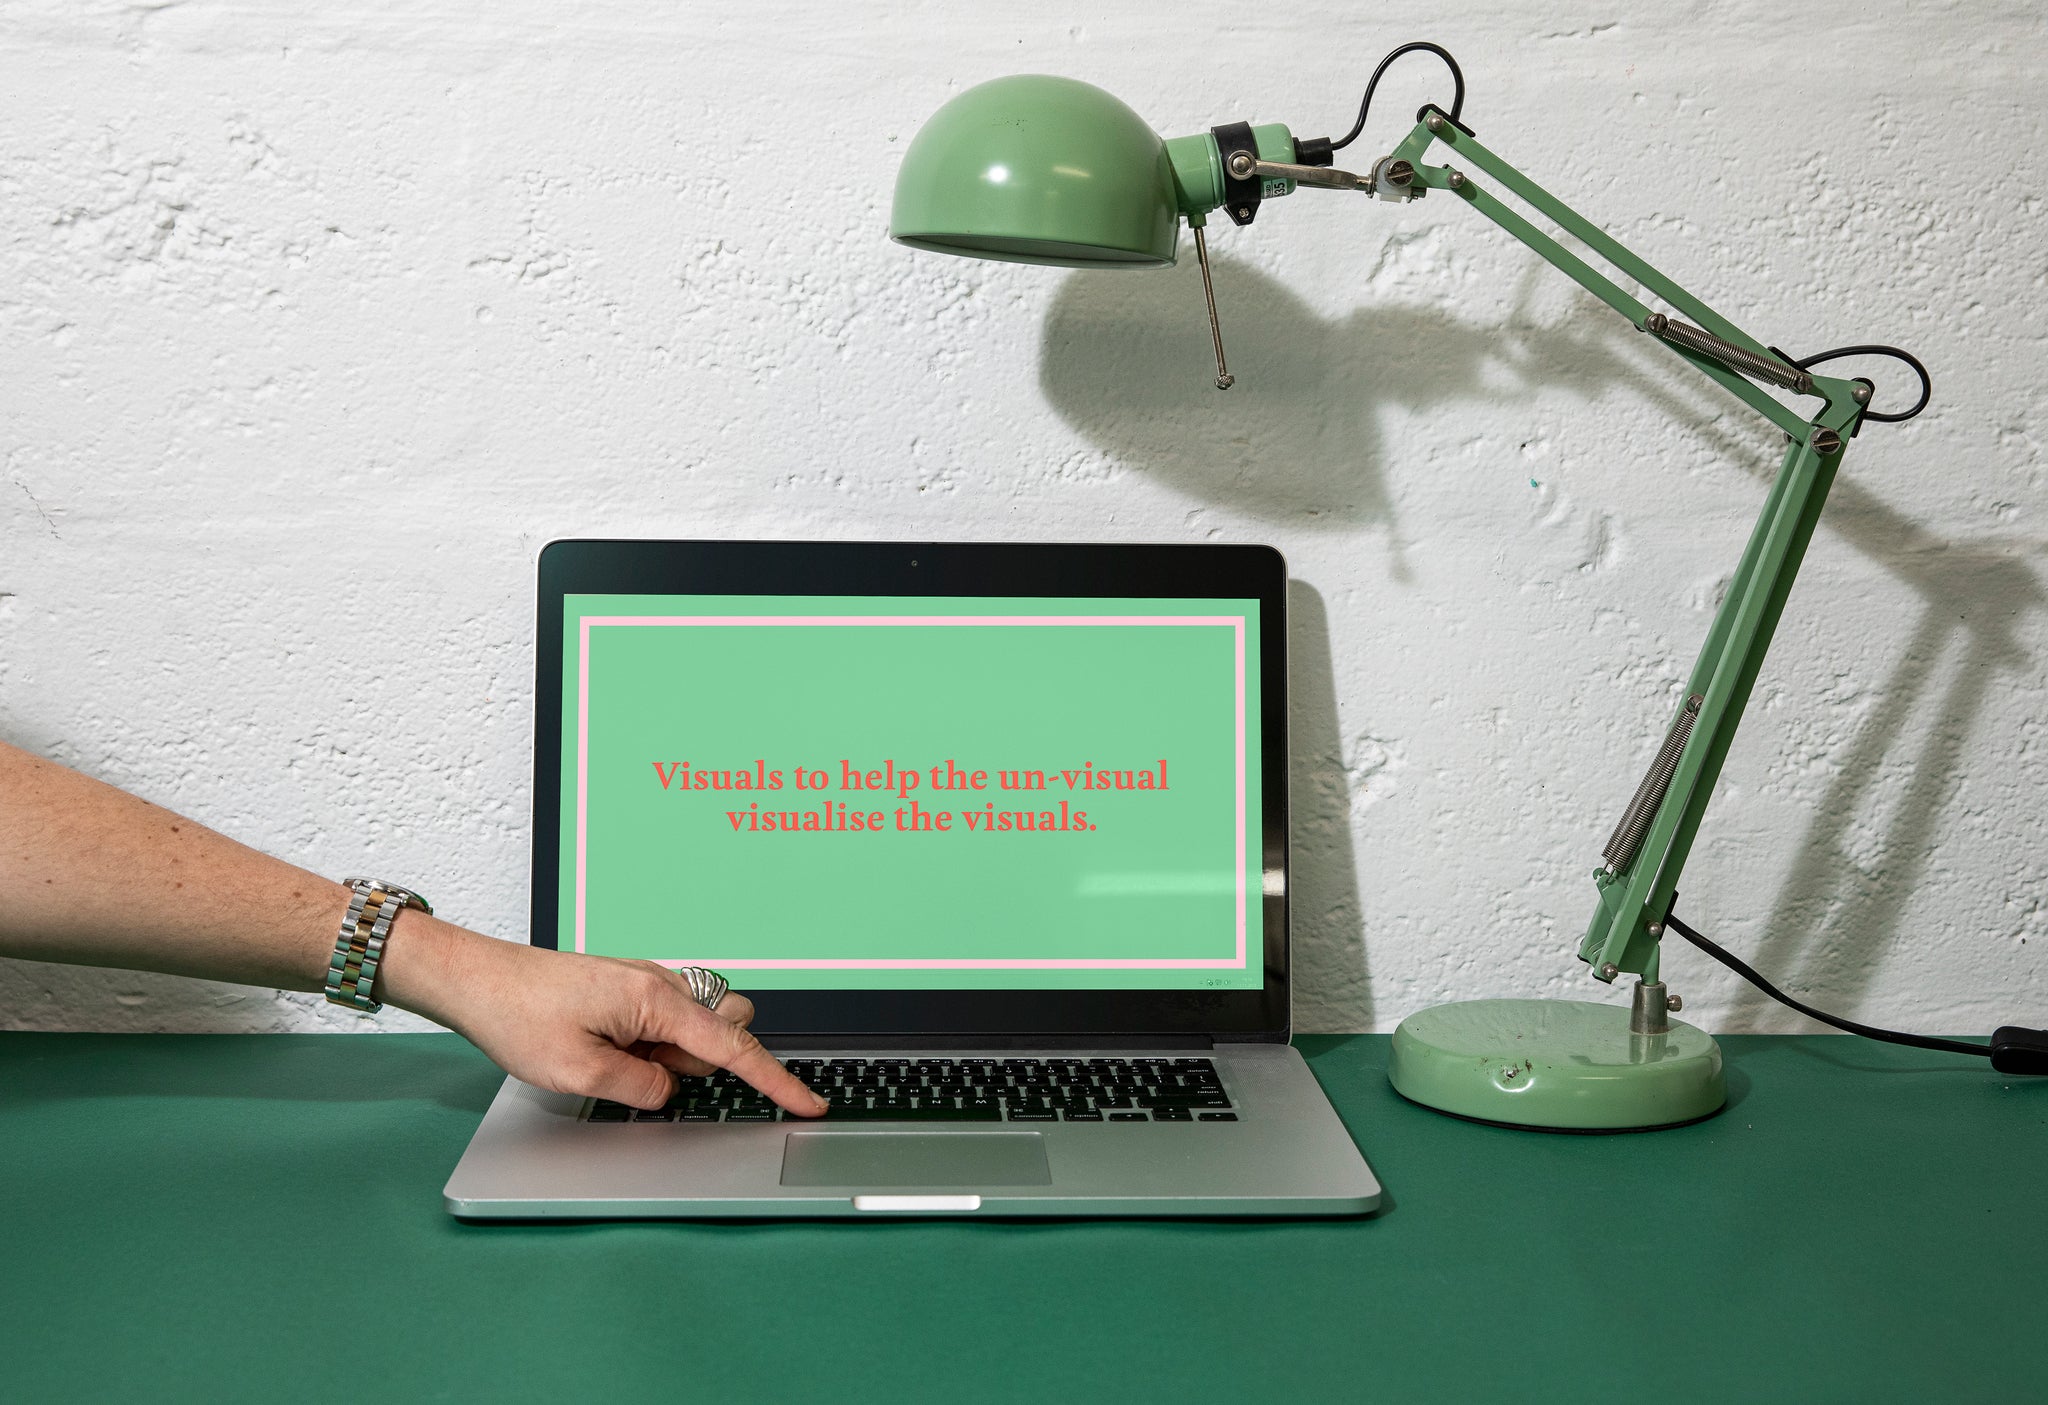 Laptop and green lamp sitting on a desk. Surface is a dark green. Laptop screen is up and a green frame is on the screen, with the words Visuals to help the un-visual visualise the visuals. A womans hand is reaching into frame touching the keyboard. 